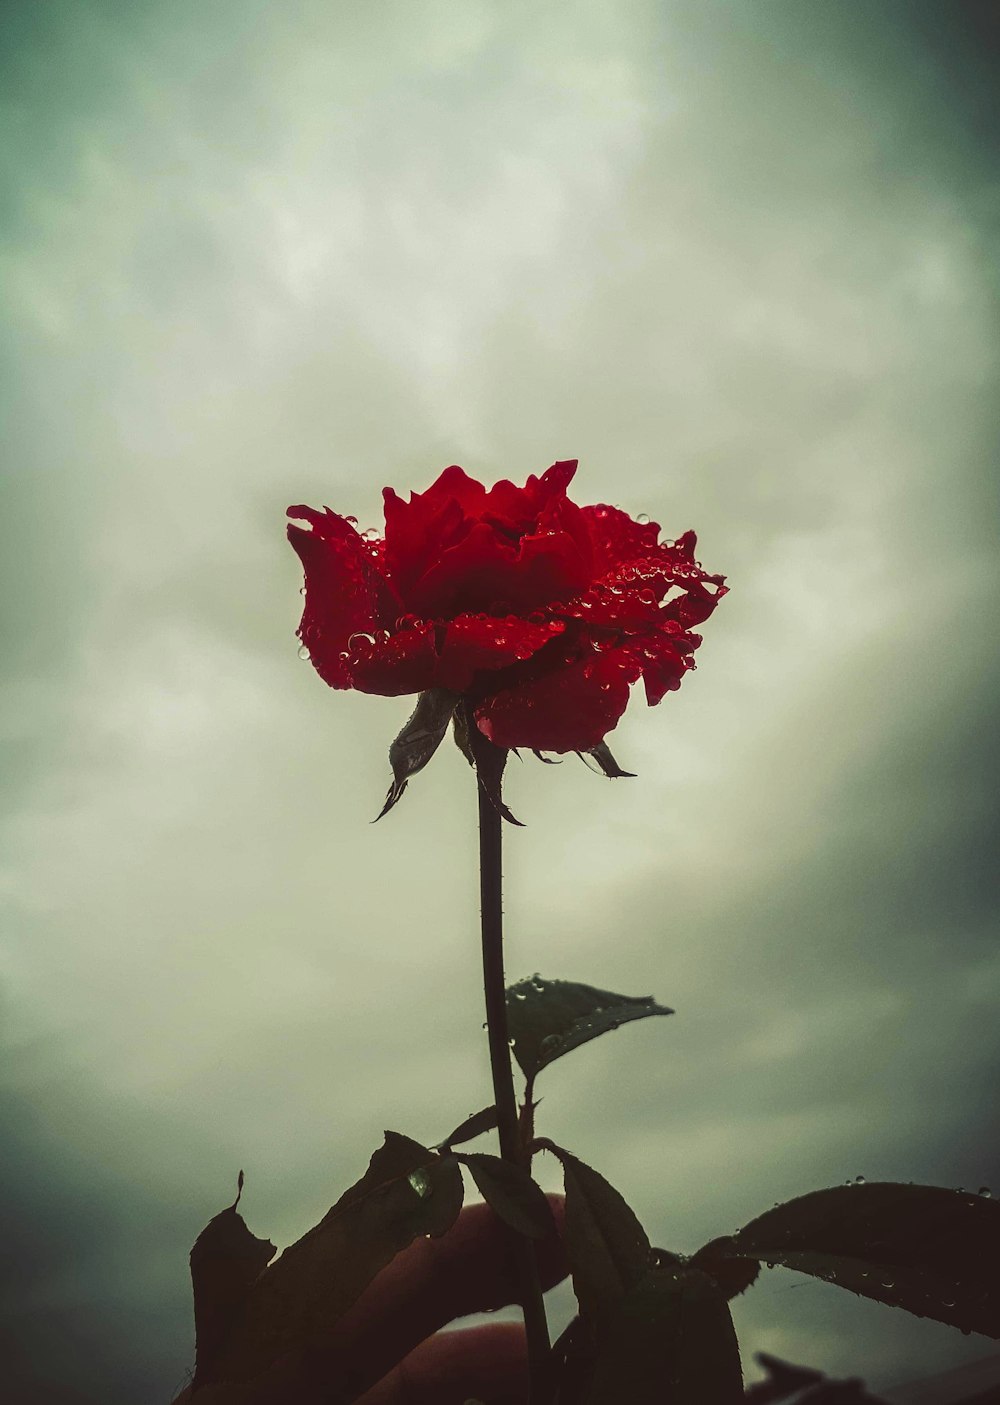 a single red rose in the middle of a cloudy sky